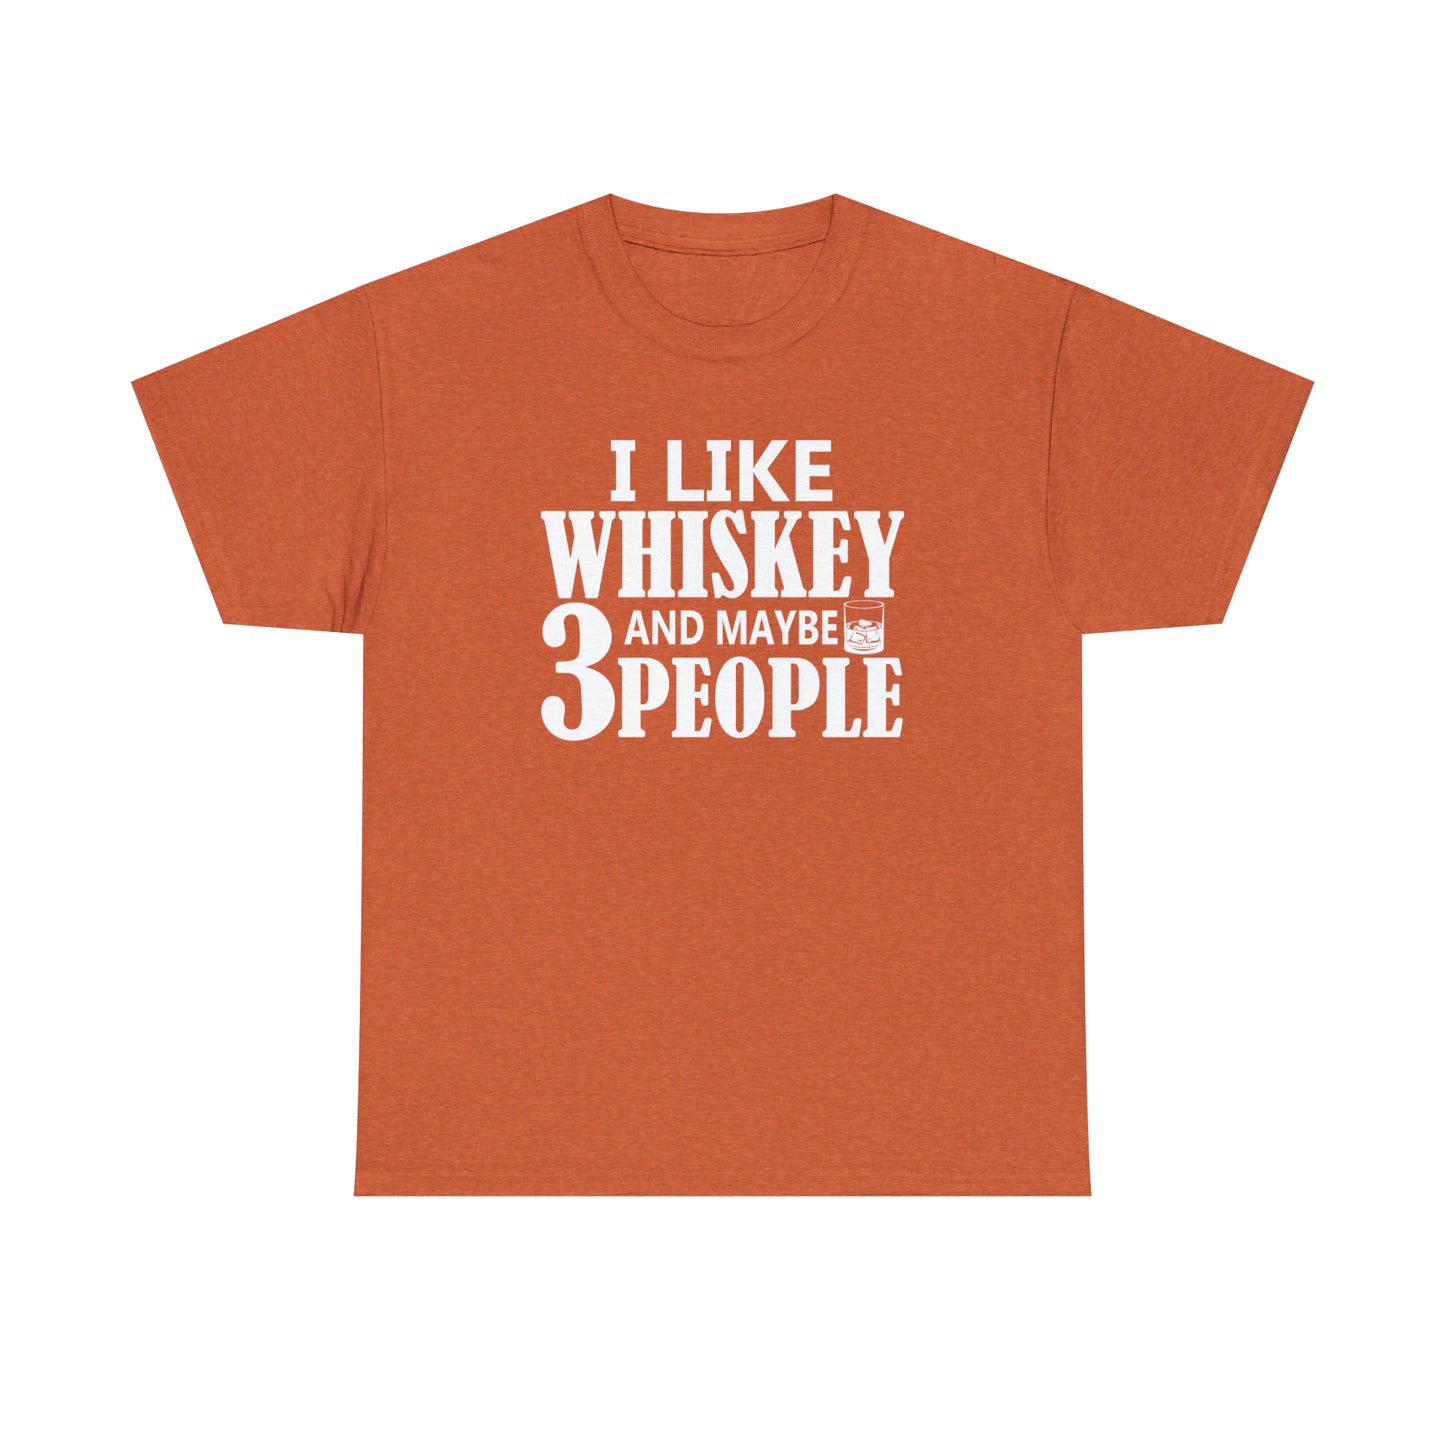 Lighthearted whiskey lover's tee with tear-away label for comfort.